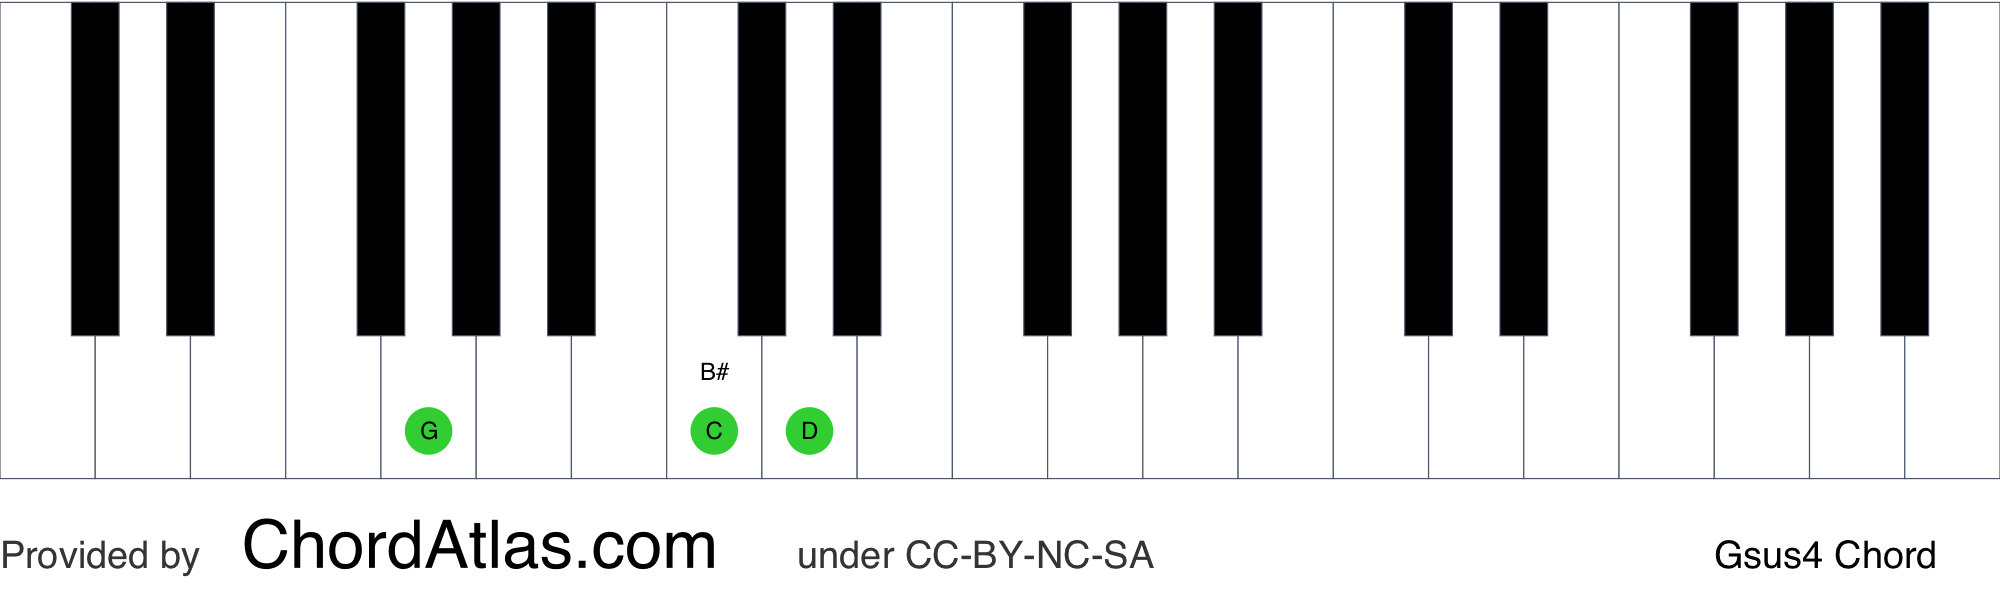 G suspended fourth piano chord - Gsus4 ChordAtlas.